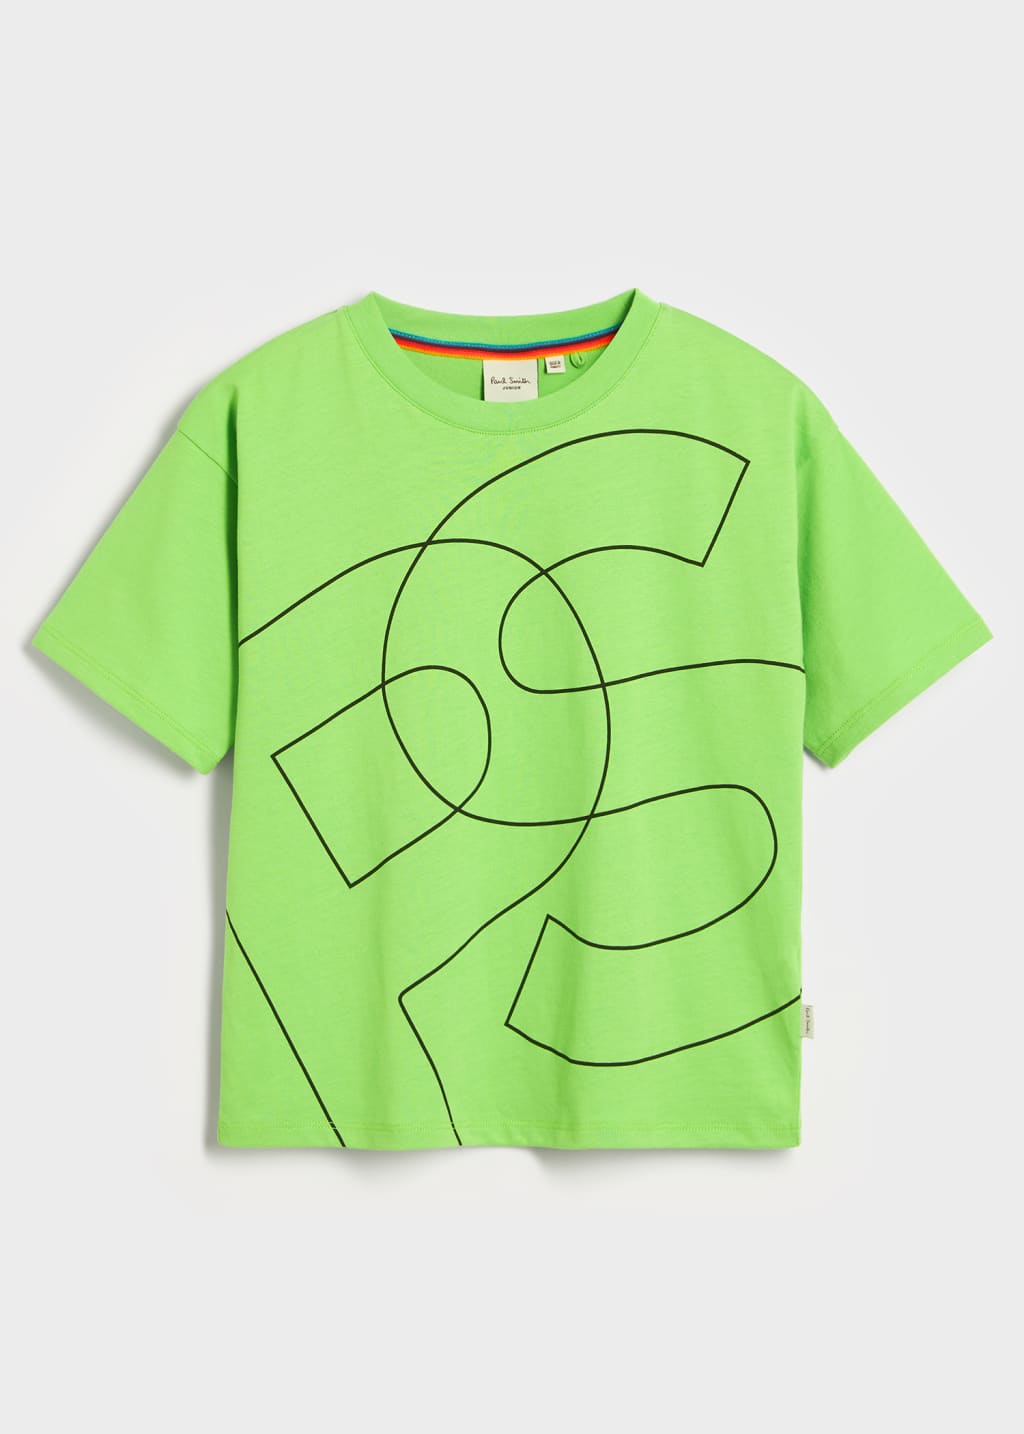 Product view - 2-13 Years Green Oversized Print T-Shirt Paul Smith